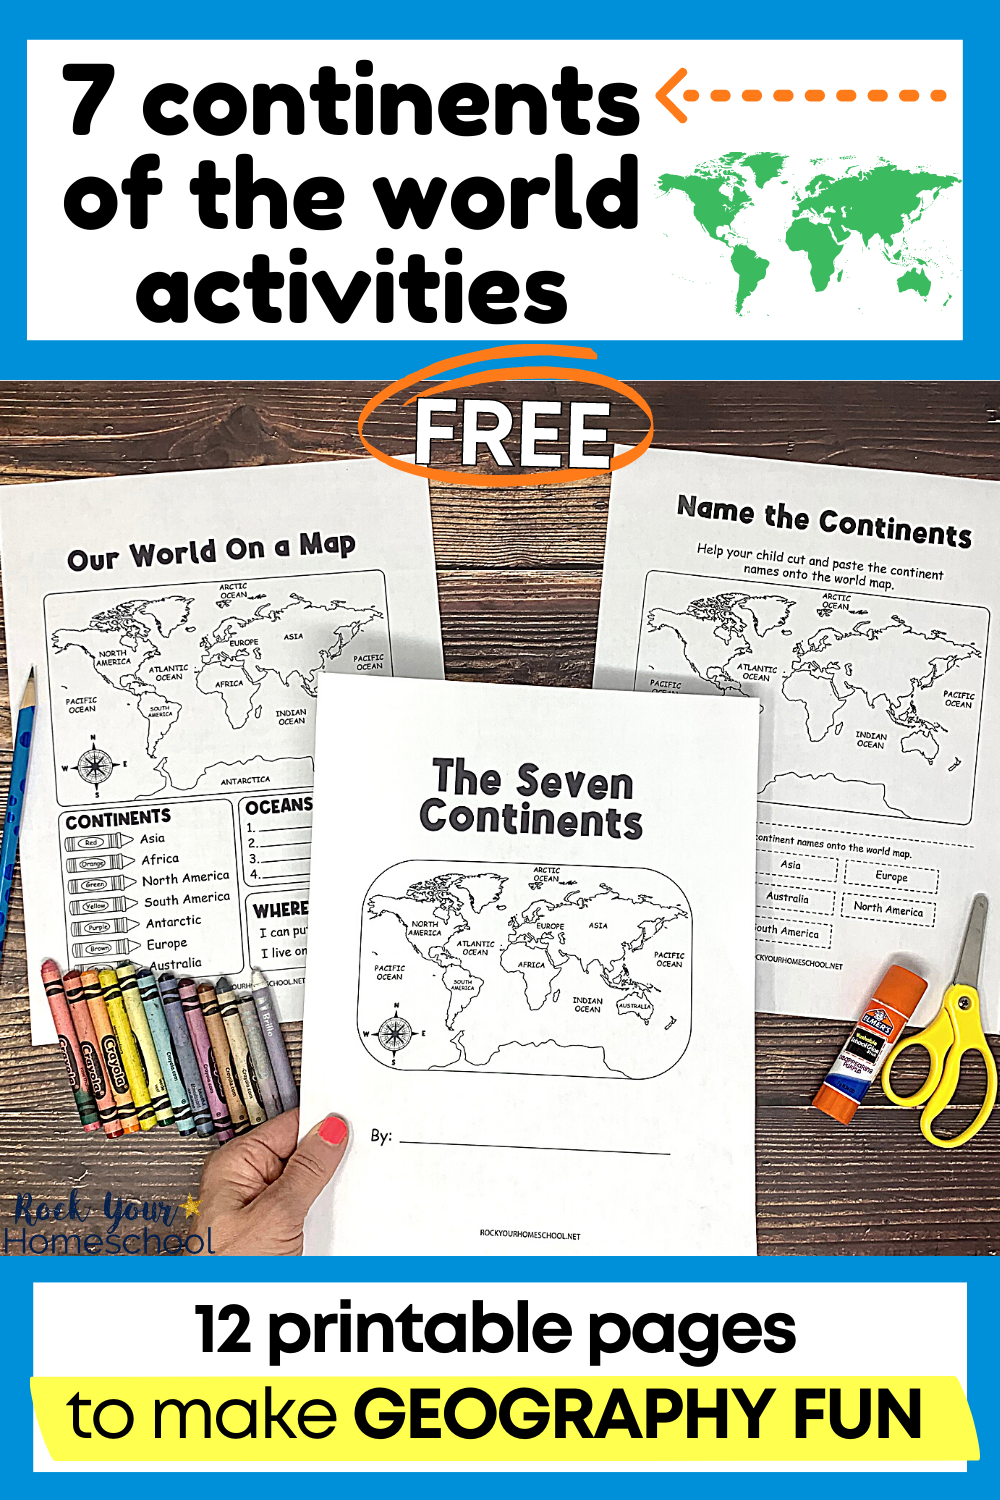 7 Continents of the World: Printable Activities for Geography Fun (Free)